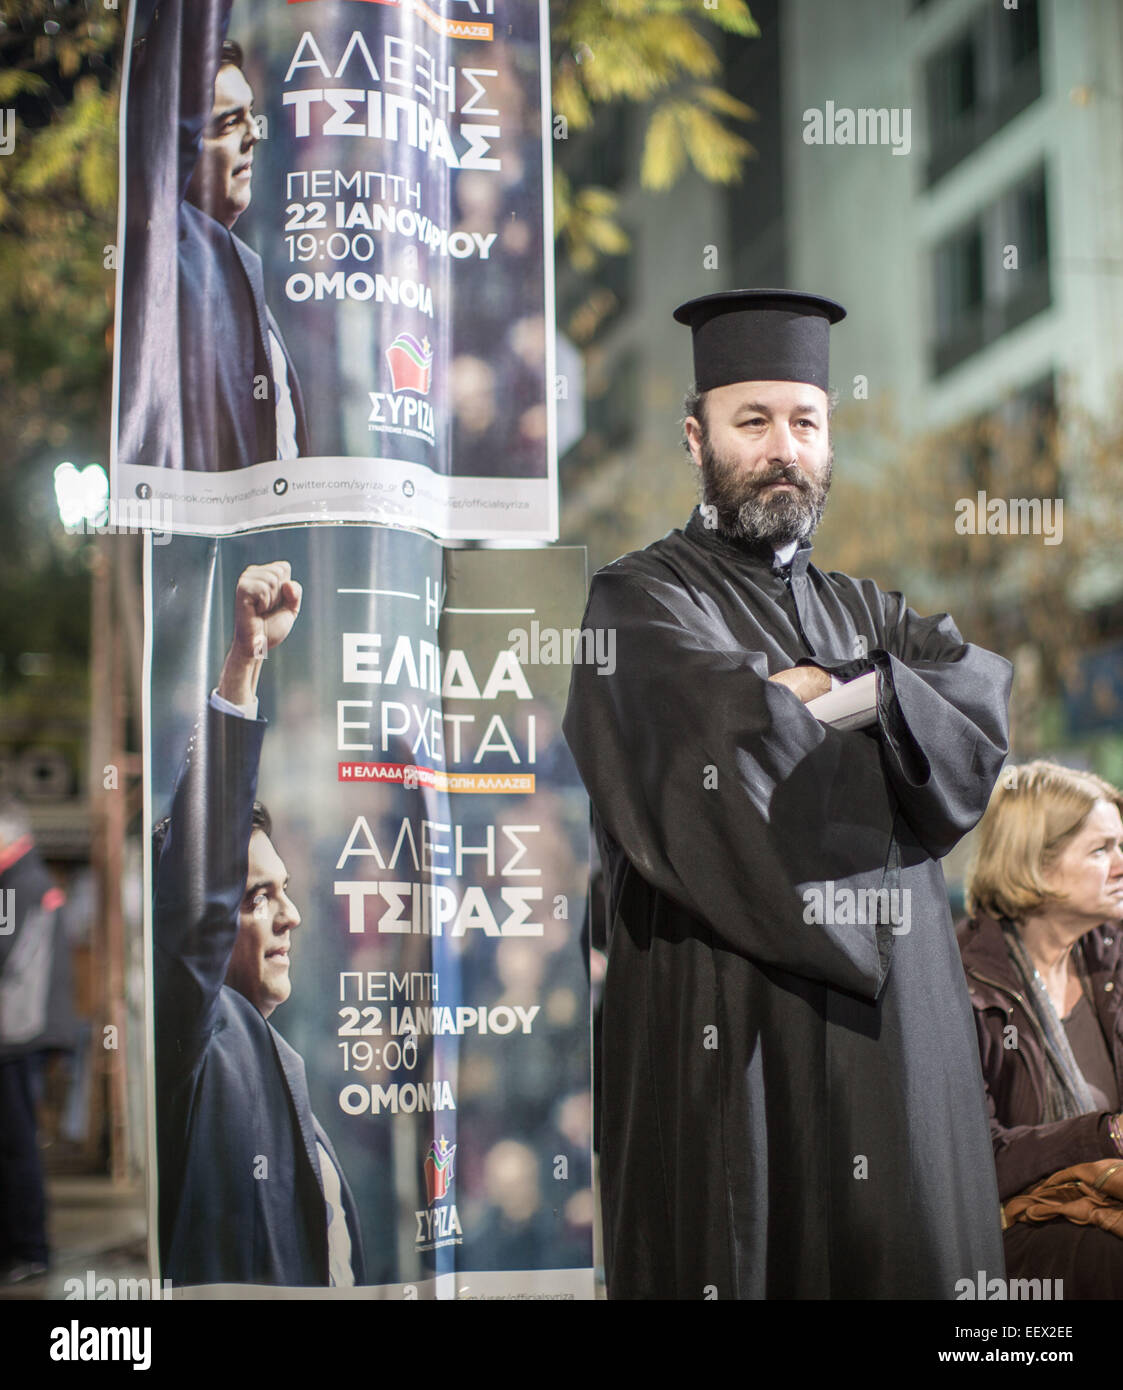 A priest is pictured next to poster of Alexis Tsipras, leader of the radical left main opposition party SYRIZA in Athens, 22 January prior to the last preelection rally. Greece's leftist, anti-austerity Syriza party has widened its lead at the top for the 25 January 2015 elections. Michael Kappeler/dpa (zu dpa 'Vor griechischer Schicksalswahl Linkspartei deutlich vorn' am 22.01.2015) Stock Photo